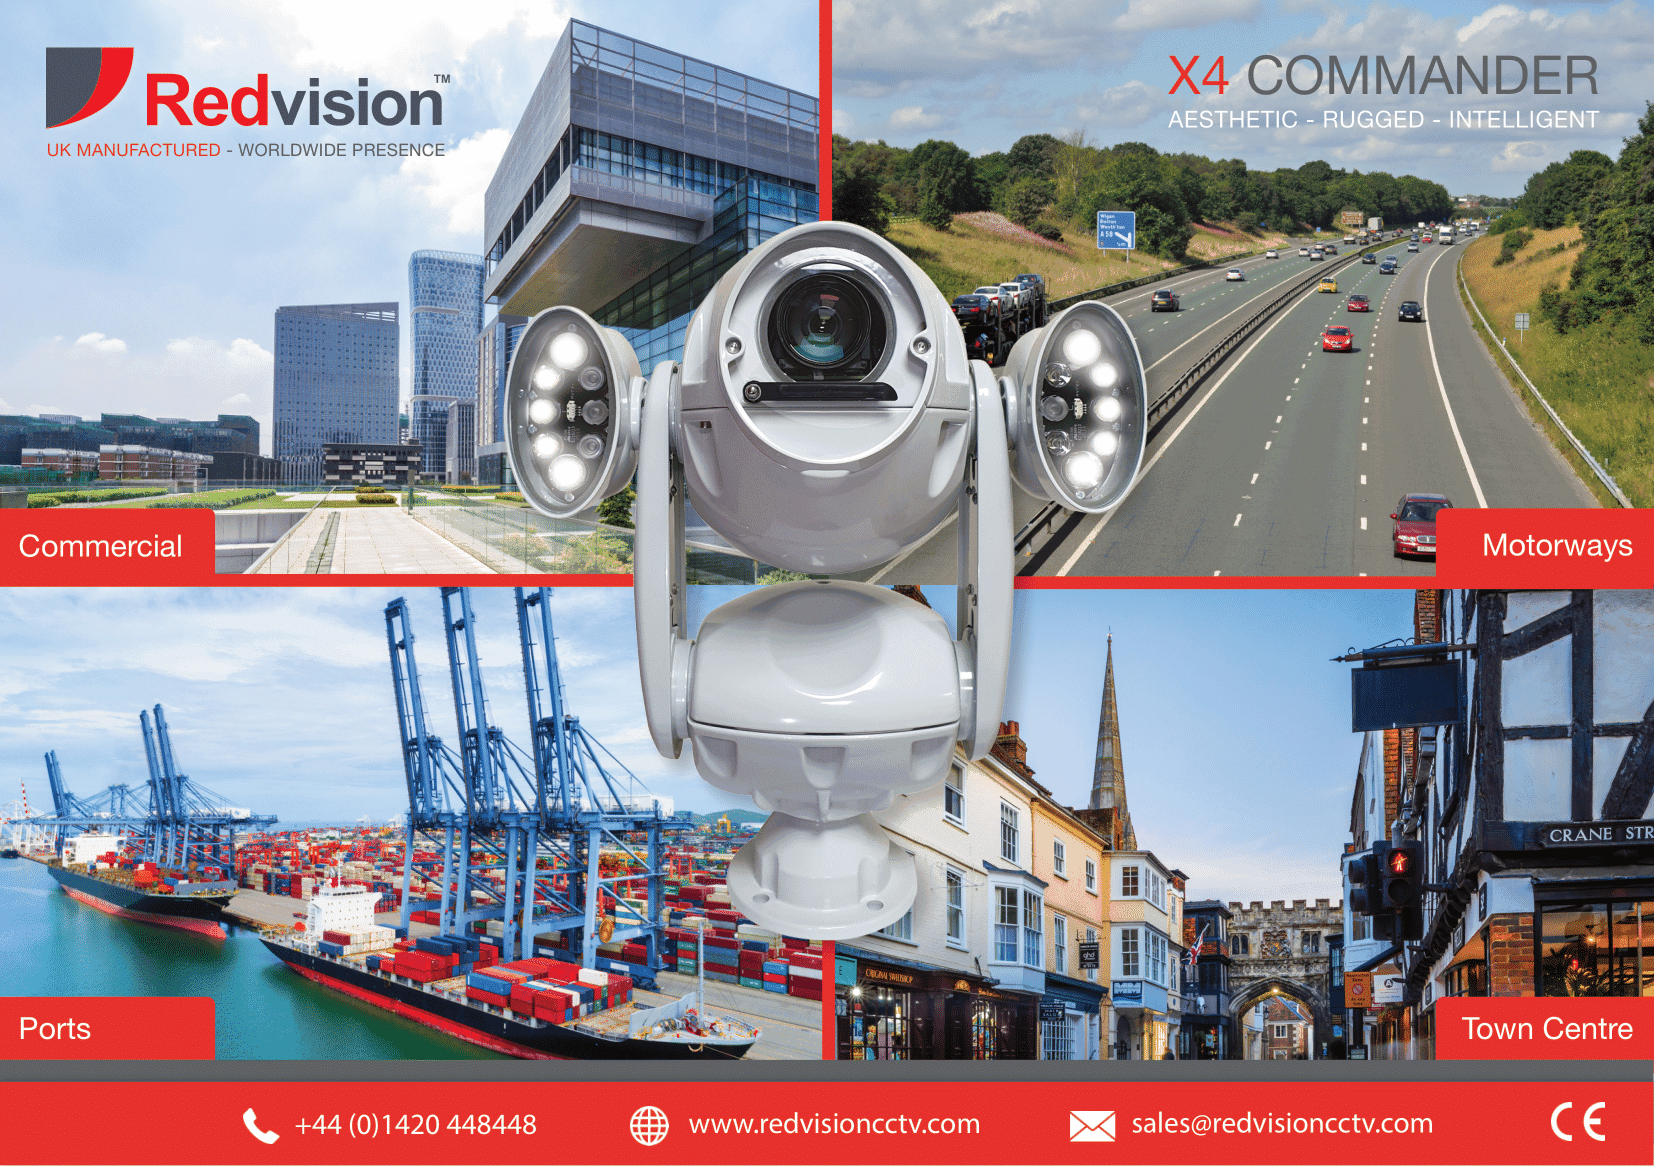 At Redvision we believe in Innovation: Introducing the X4 COMMANDER™